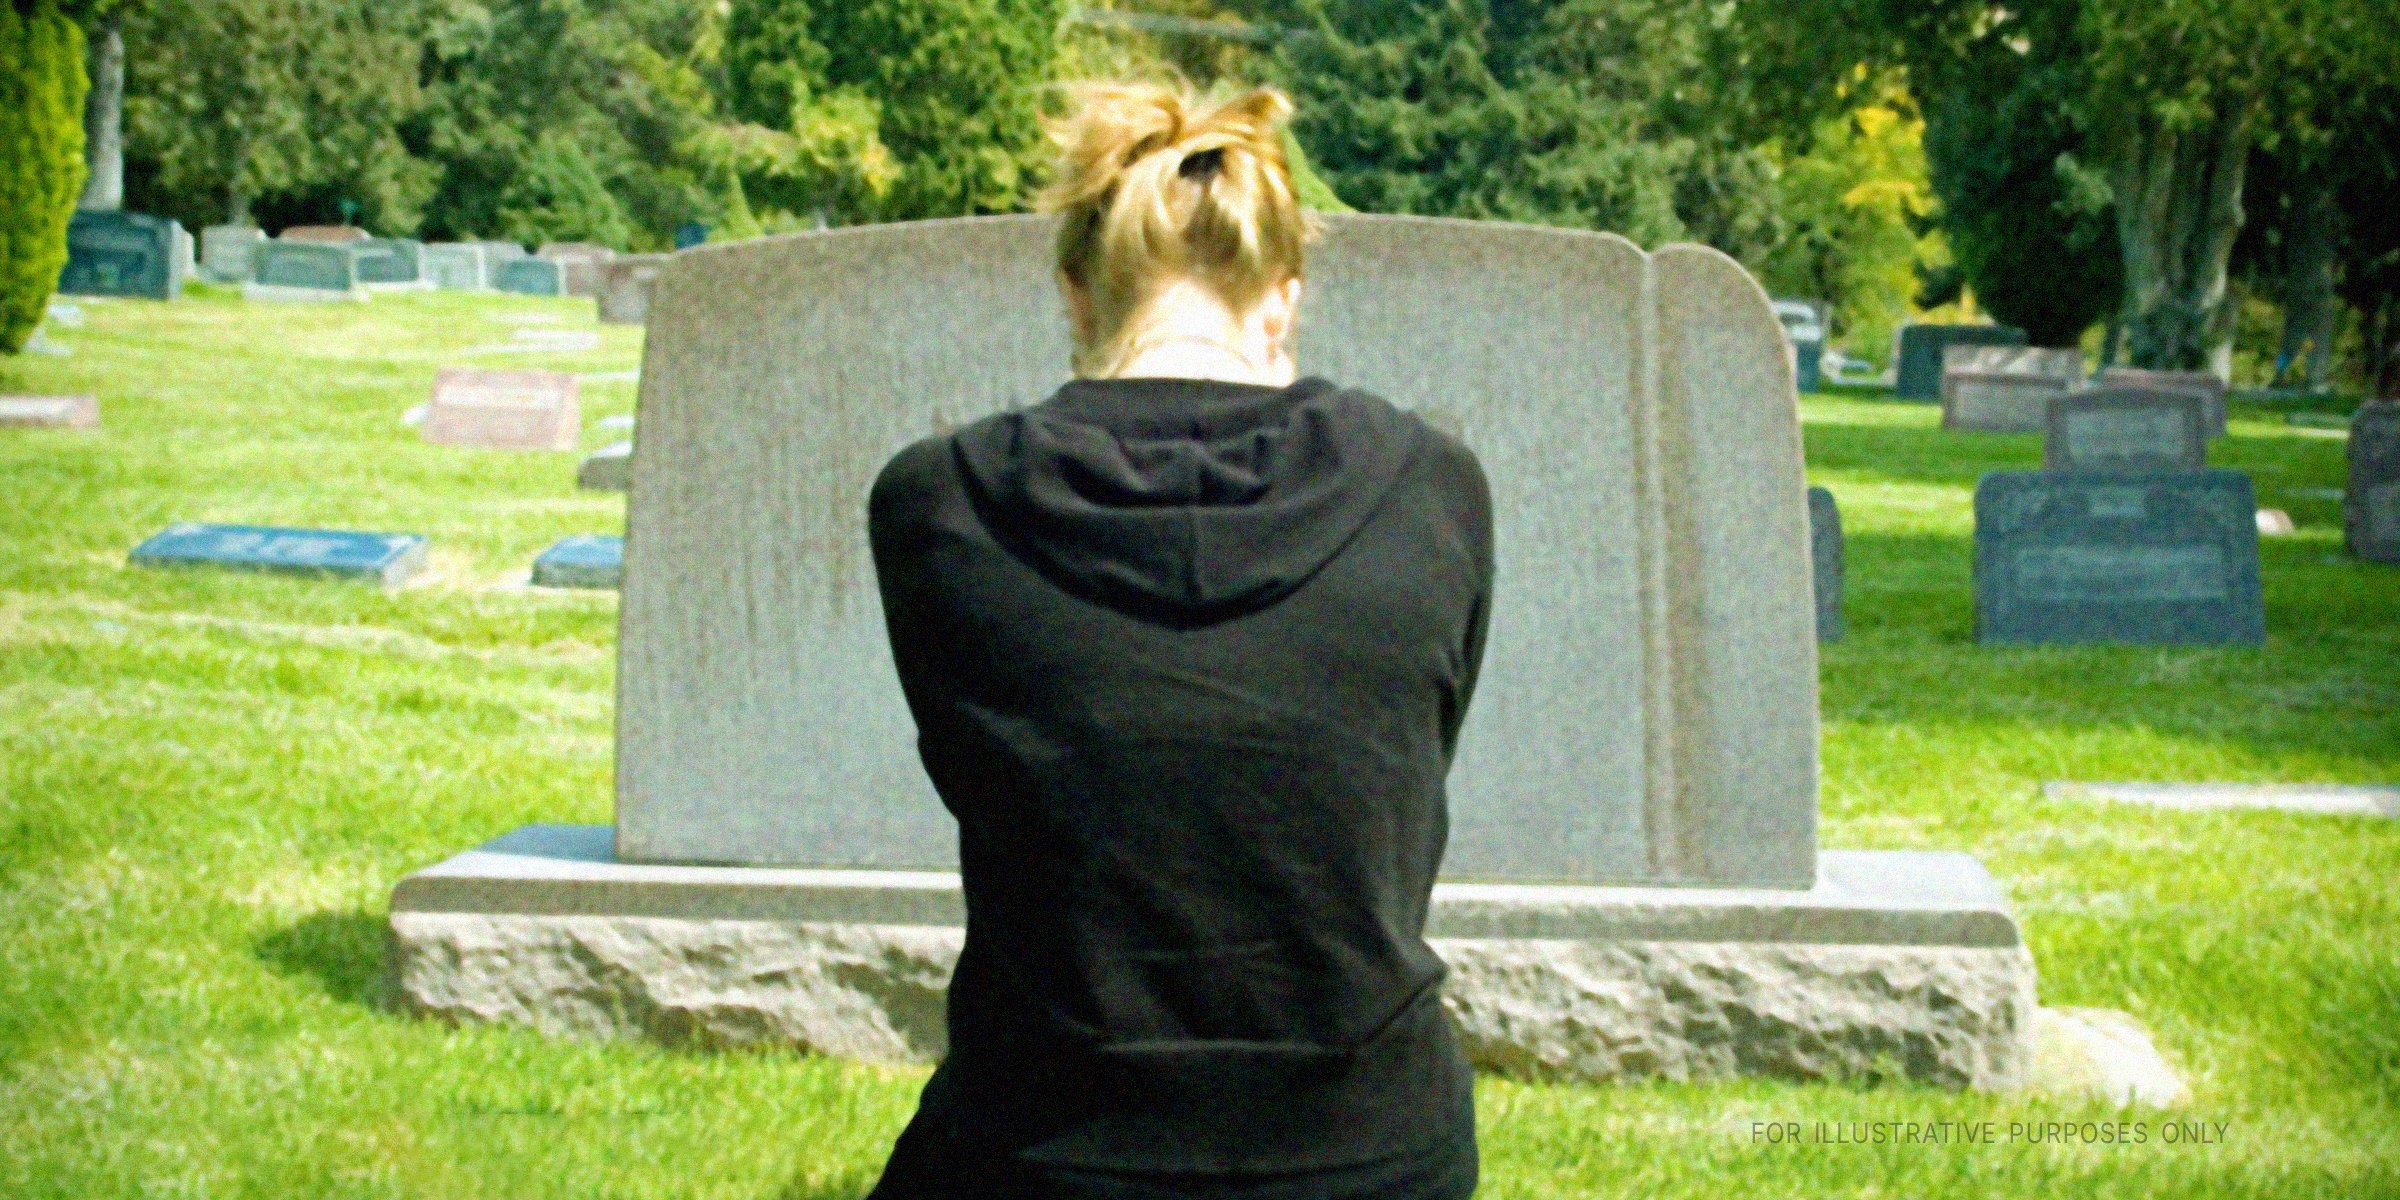 Teen Girl Visits Dad's Grave and Is in Tears. | Source: Getty Images